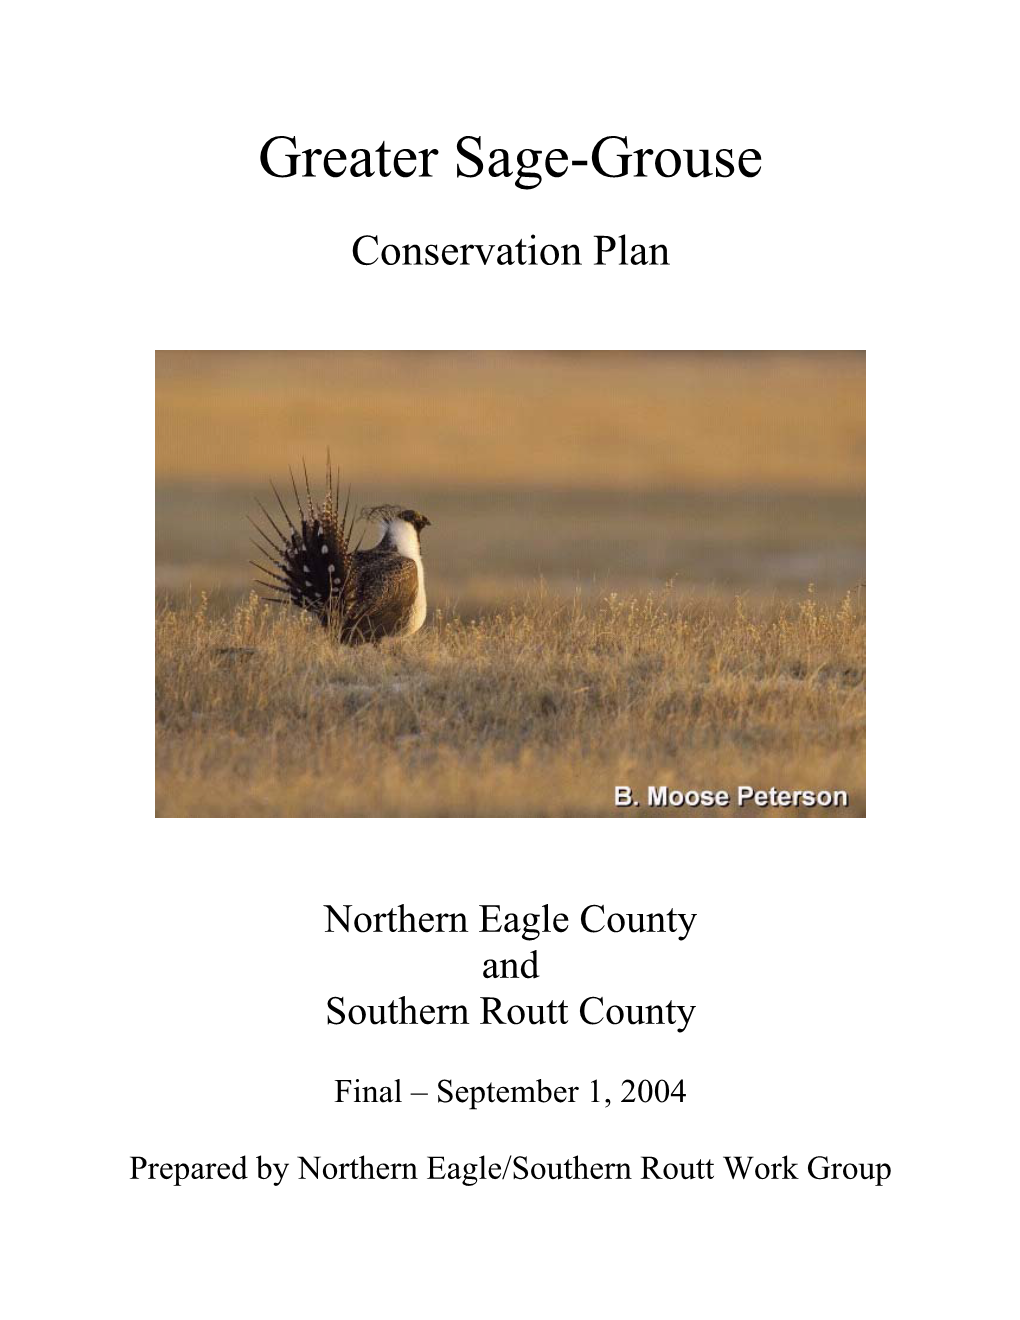 Greater Sage-Grouse Conservation Plan